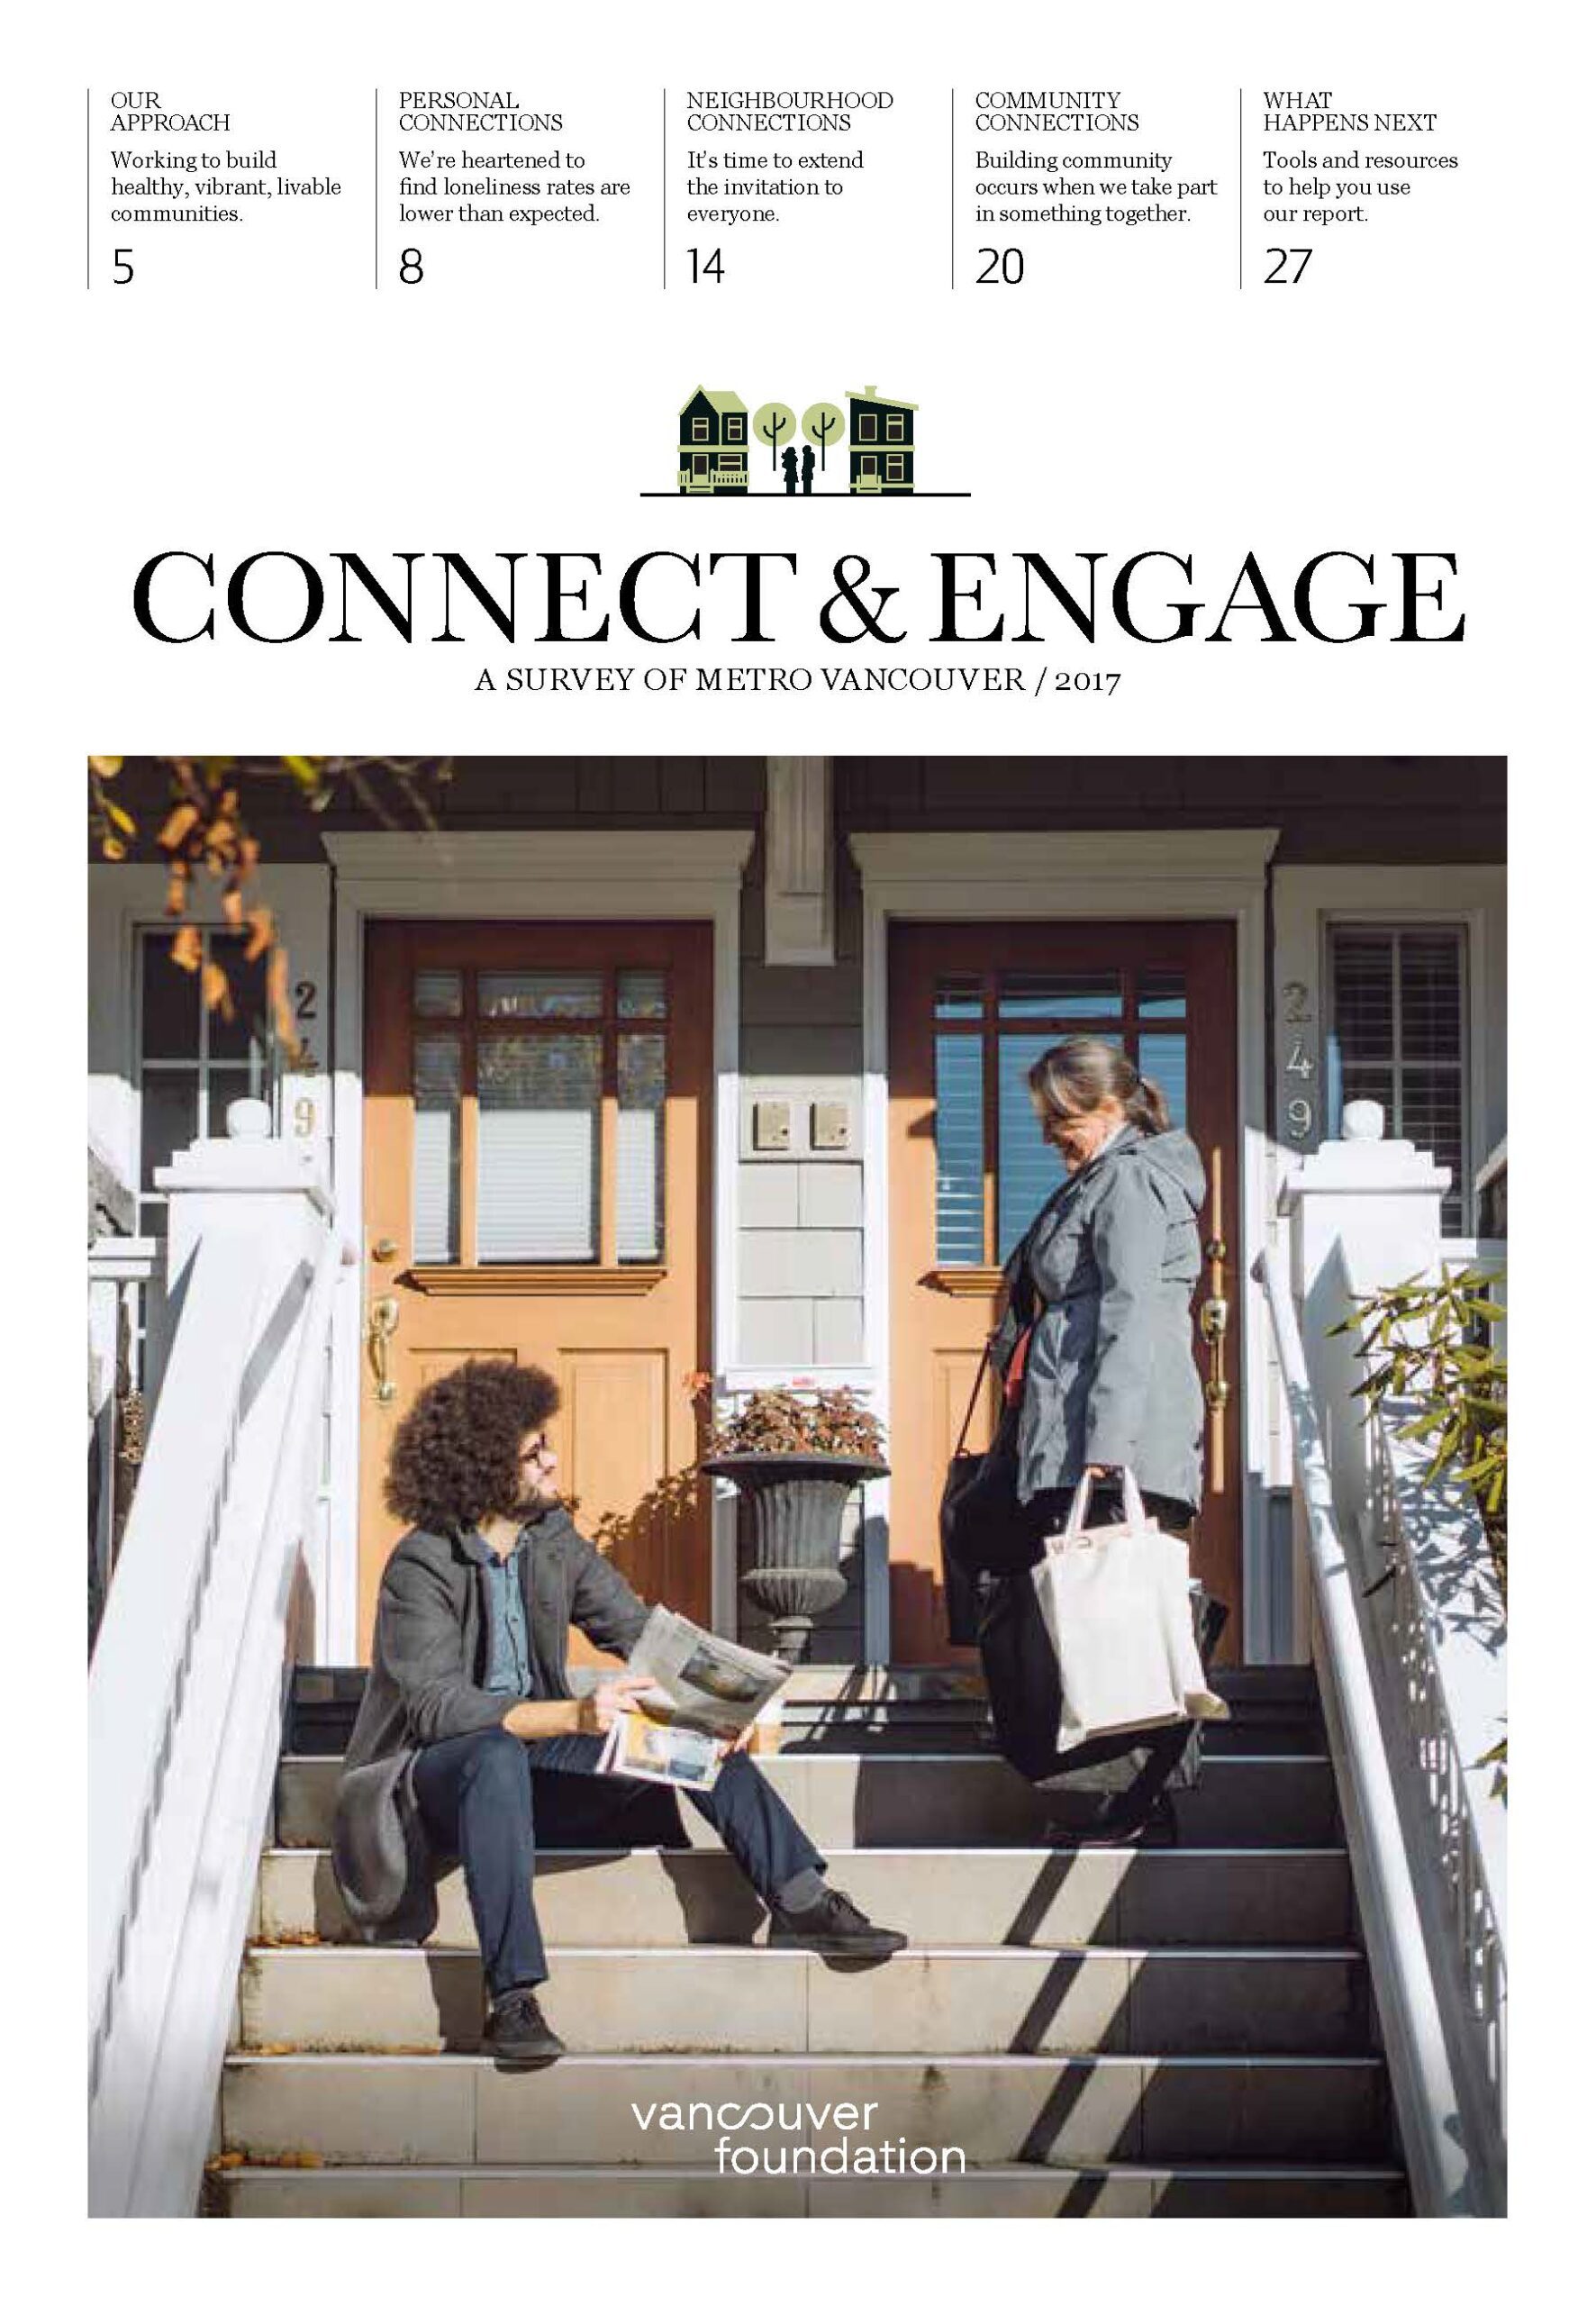 Cover of a publication featuring a man sitting on the steps of a townhouse holding a newspaper and smiling at a woman standing on the steps holding grocery bags with text reading "Connect and Engage, a survey of Metro Vancouver 2017"